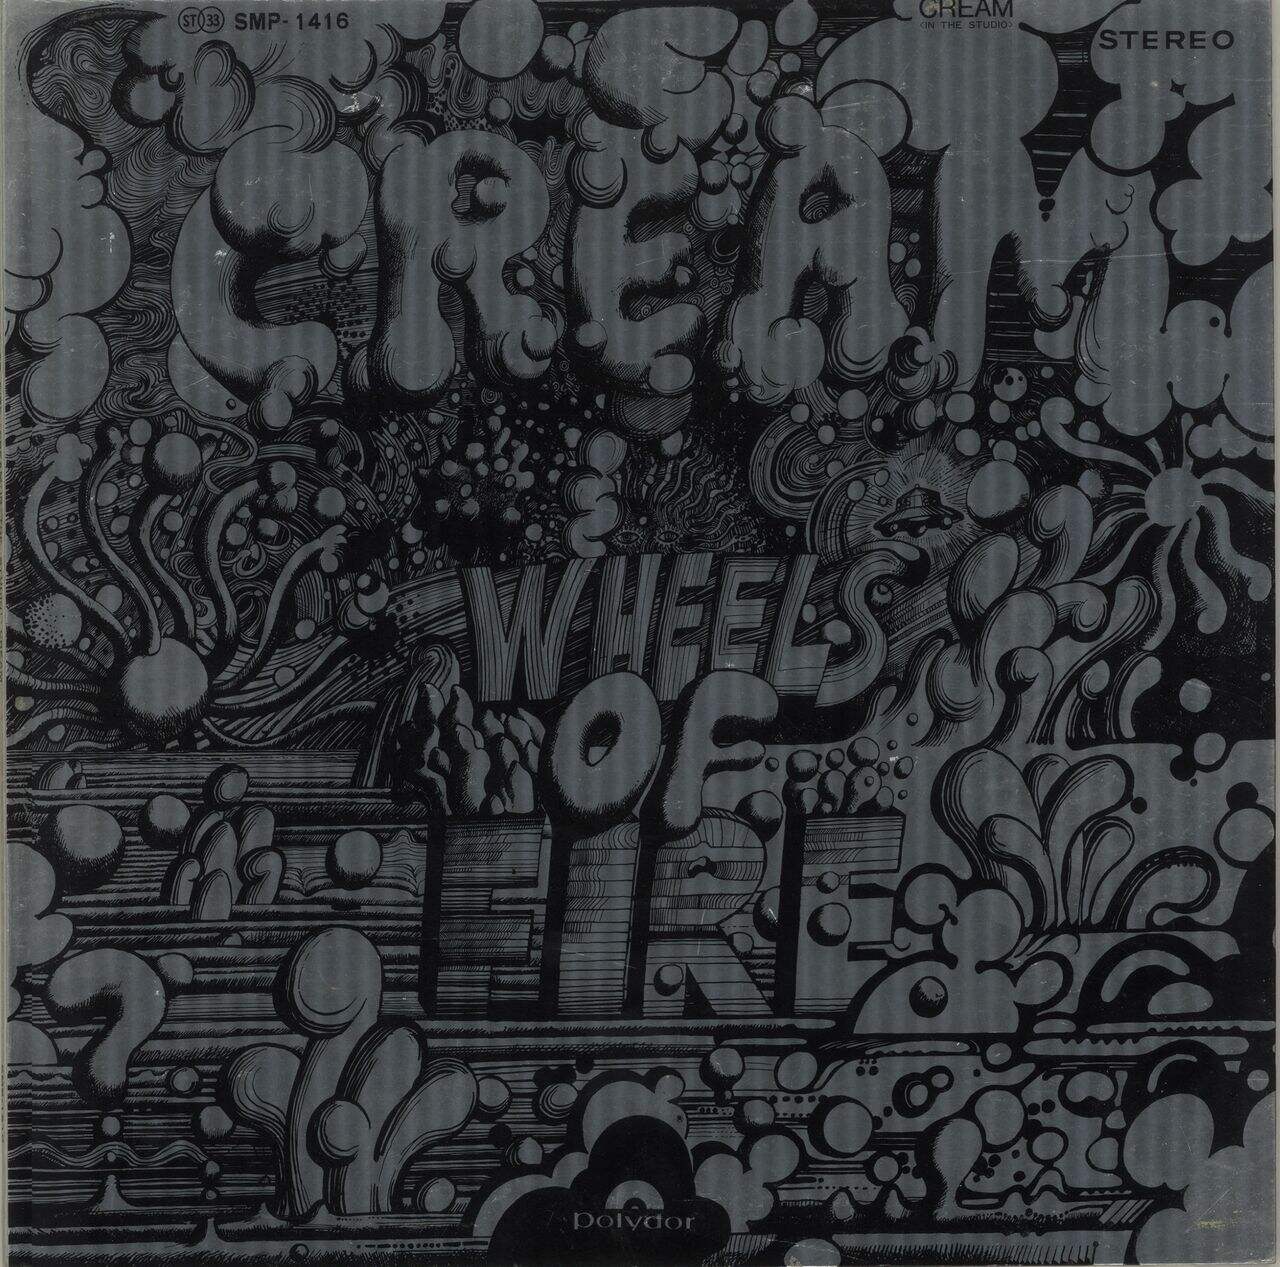 Cream Wheels Of Fire/ In The Studio/ Live At The Fillmore Japanese 2-LP vinyl set